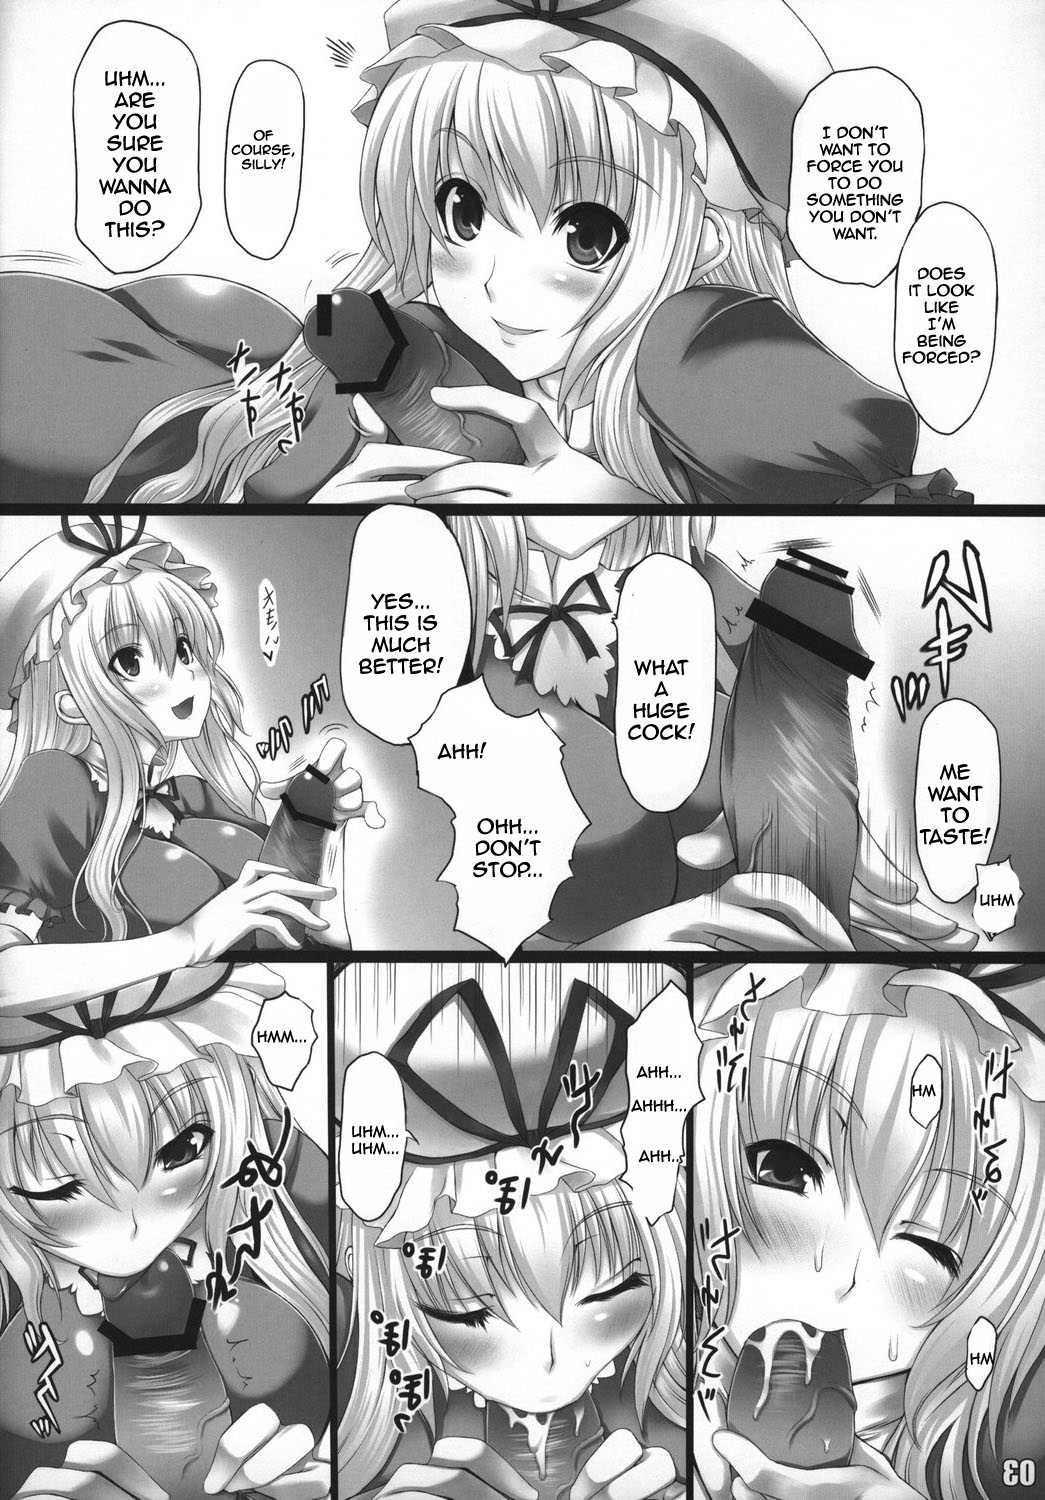 Inter Mammary (Touhou) [eng] 